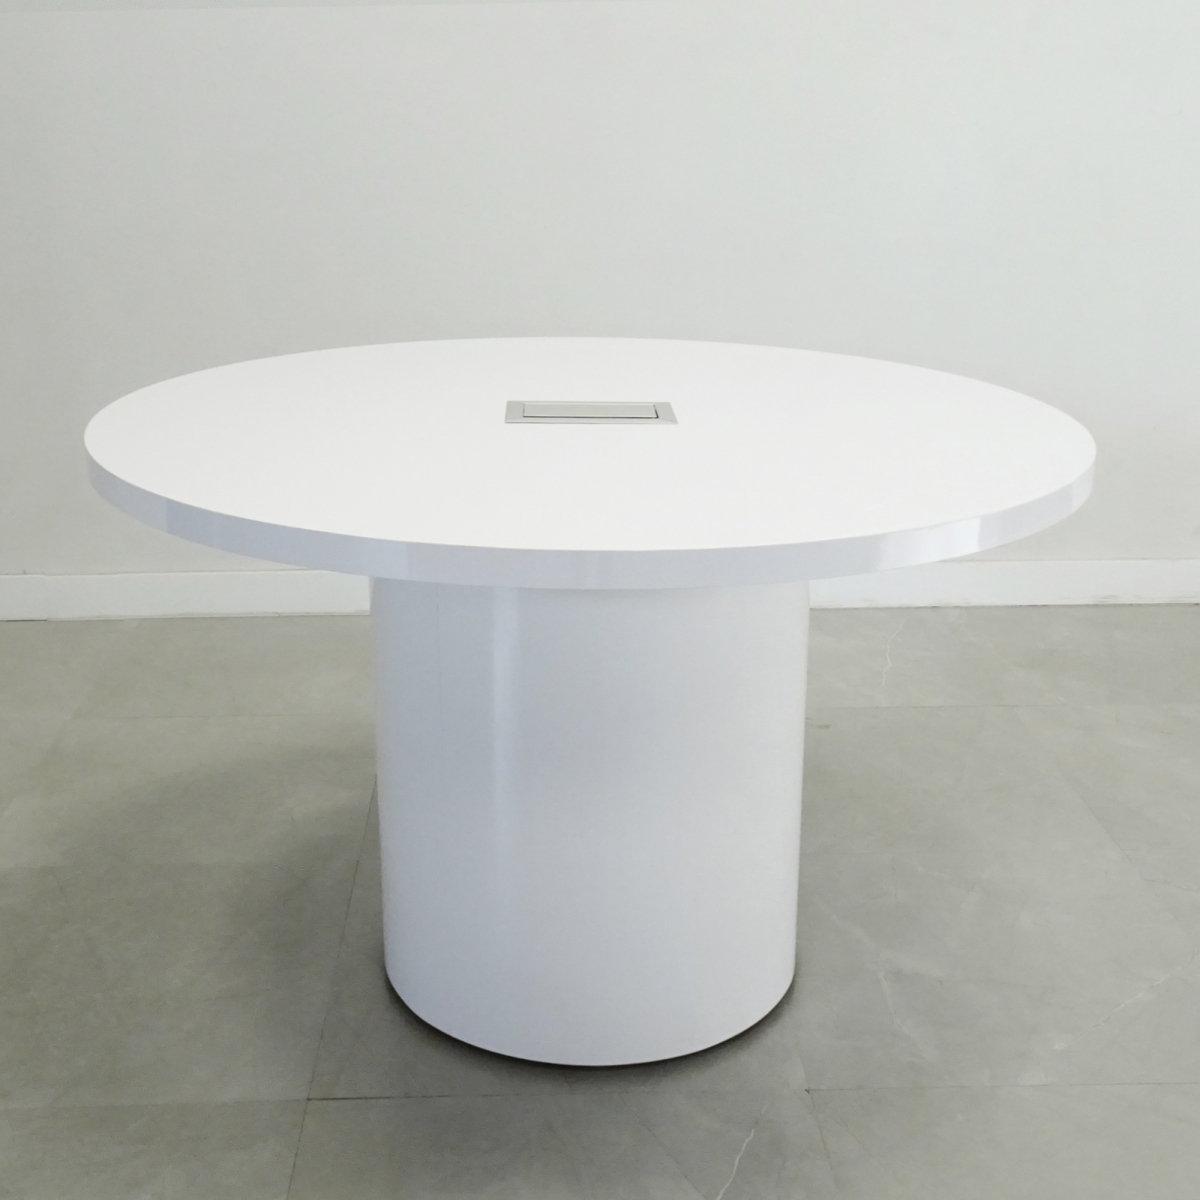 48 In. Axis Round Gloss Meeting Table -Stock # 1001-D